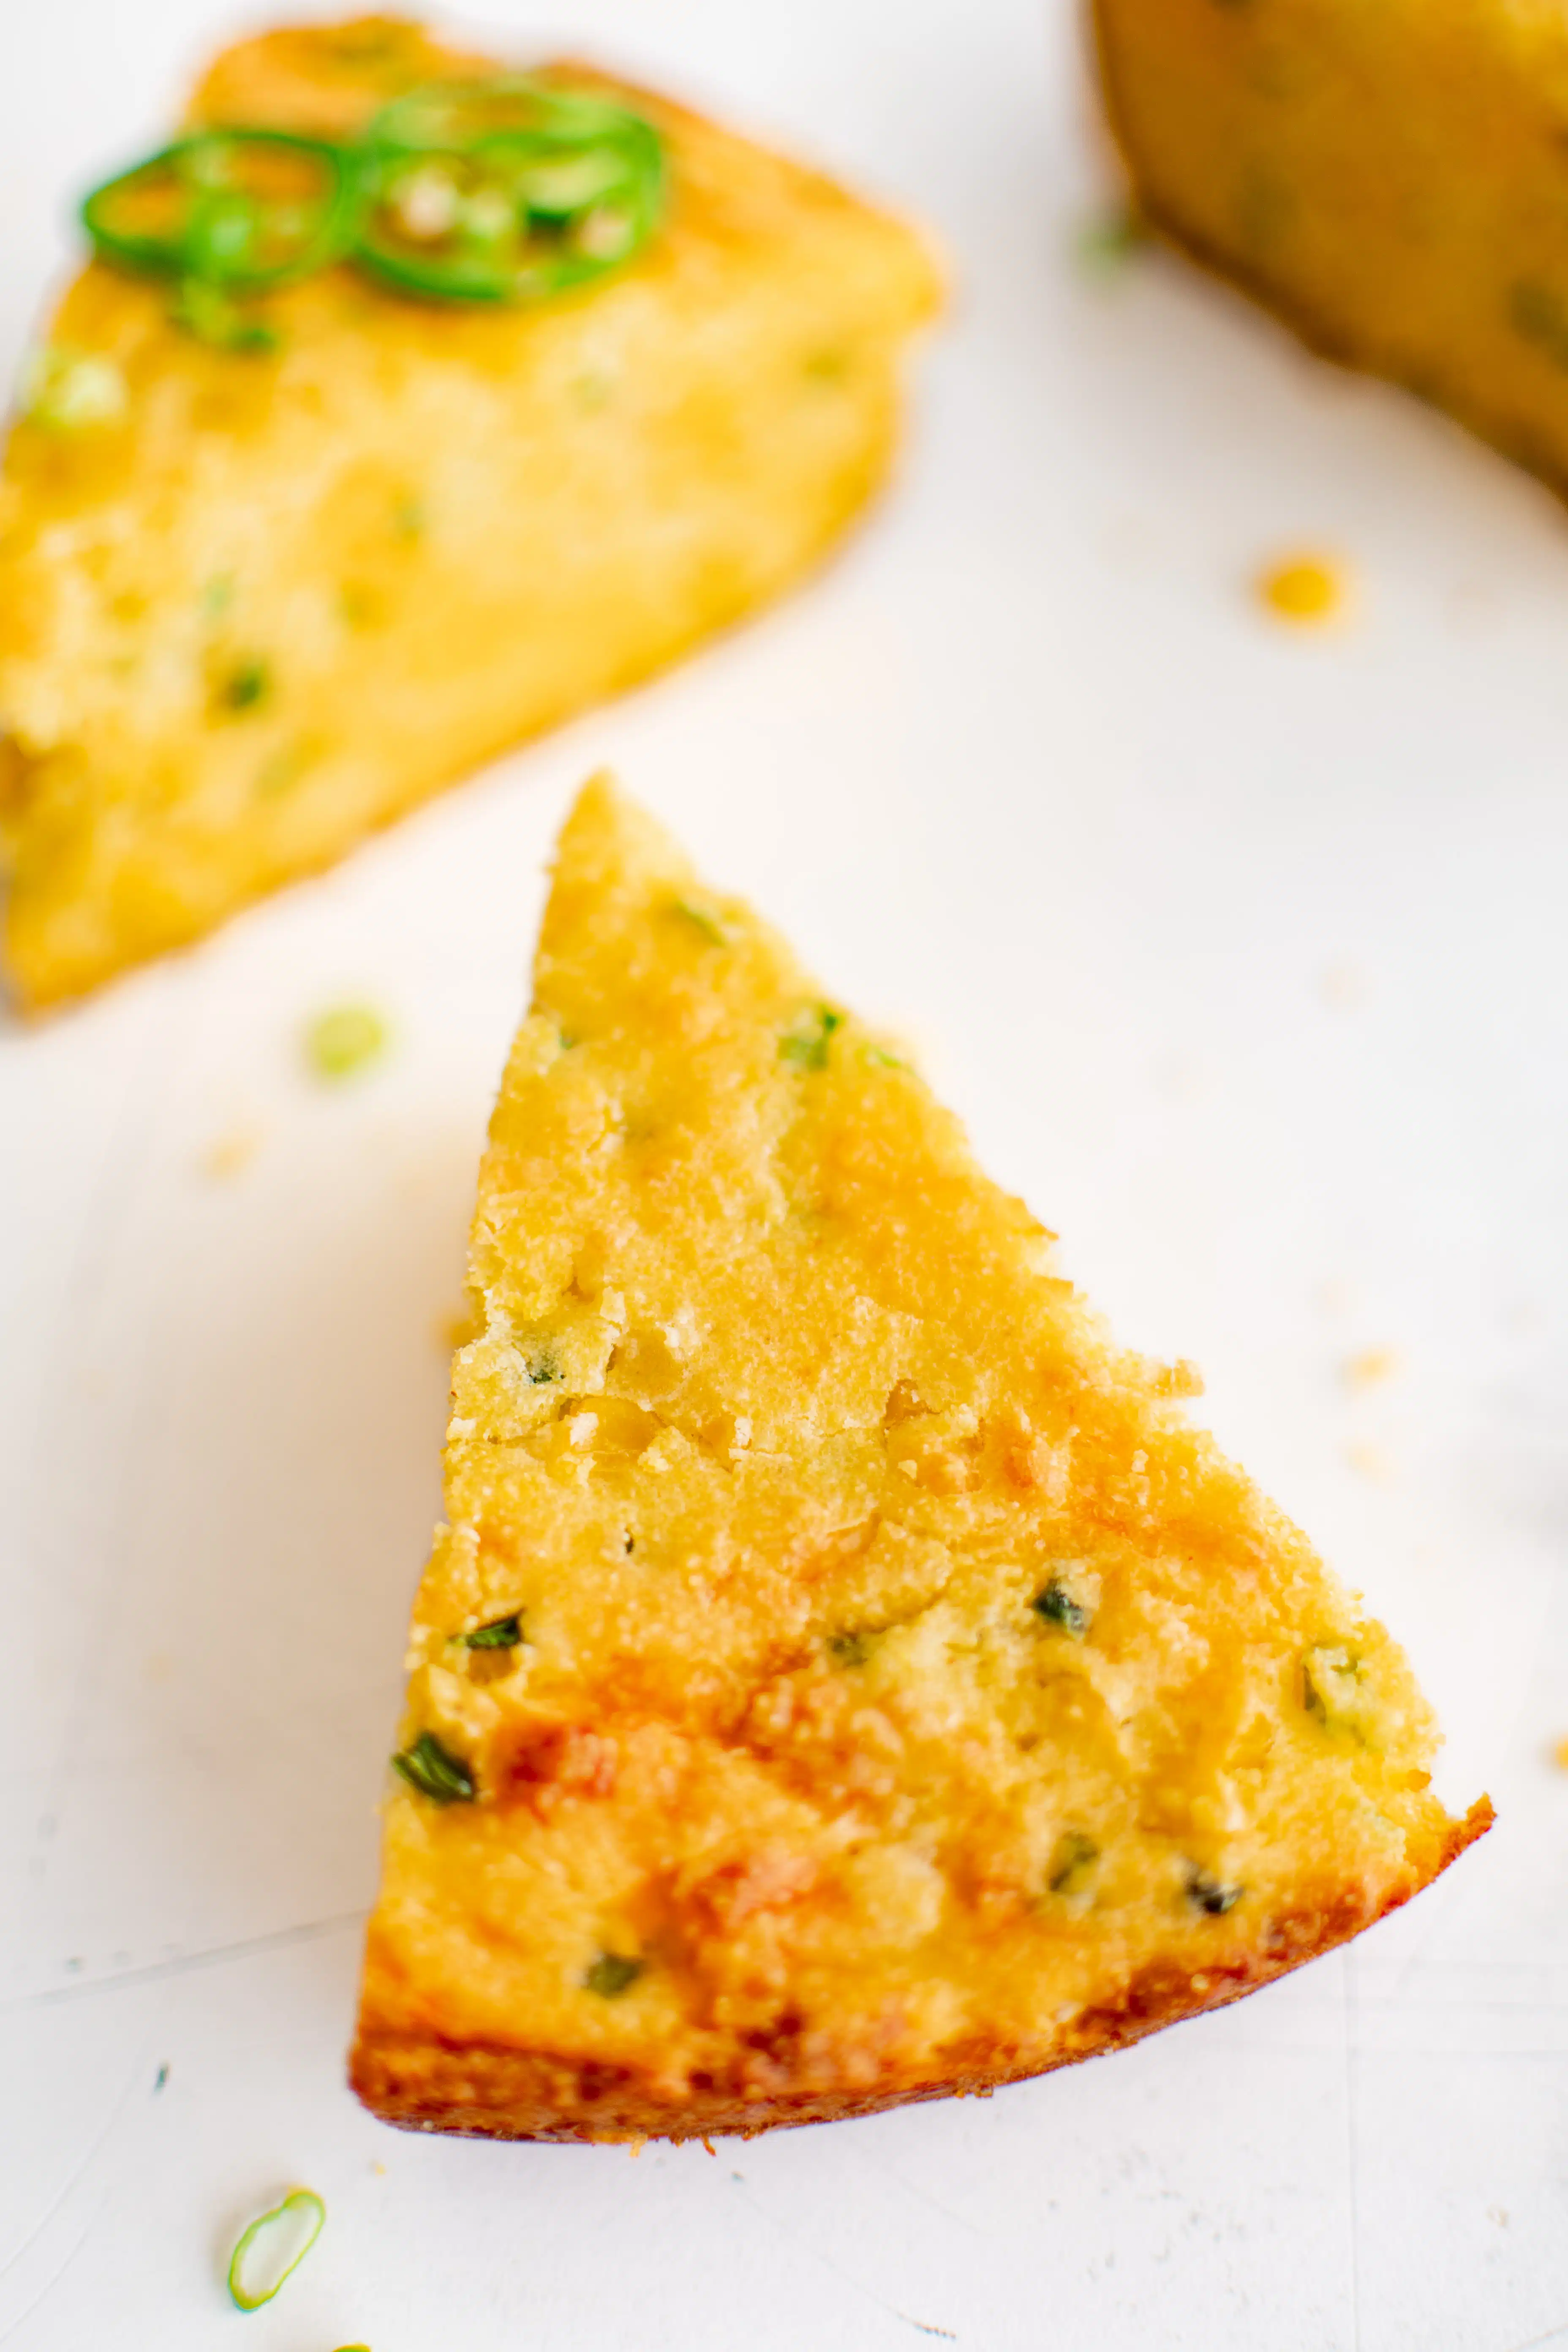 Large slice of Mexican cornbread with golden brown edges and specks of green from jalapeño.